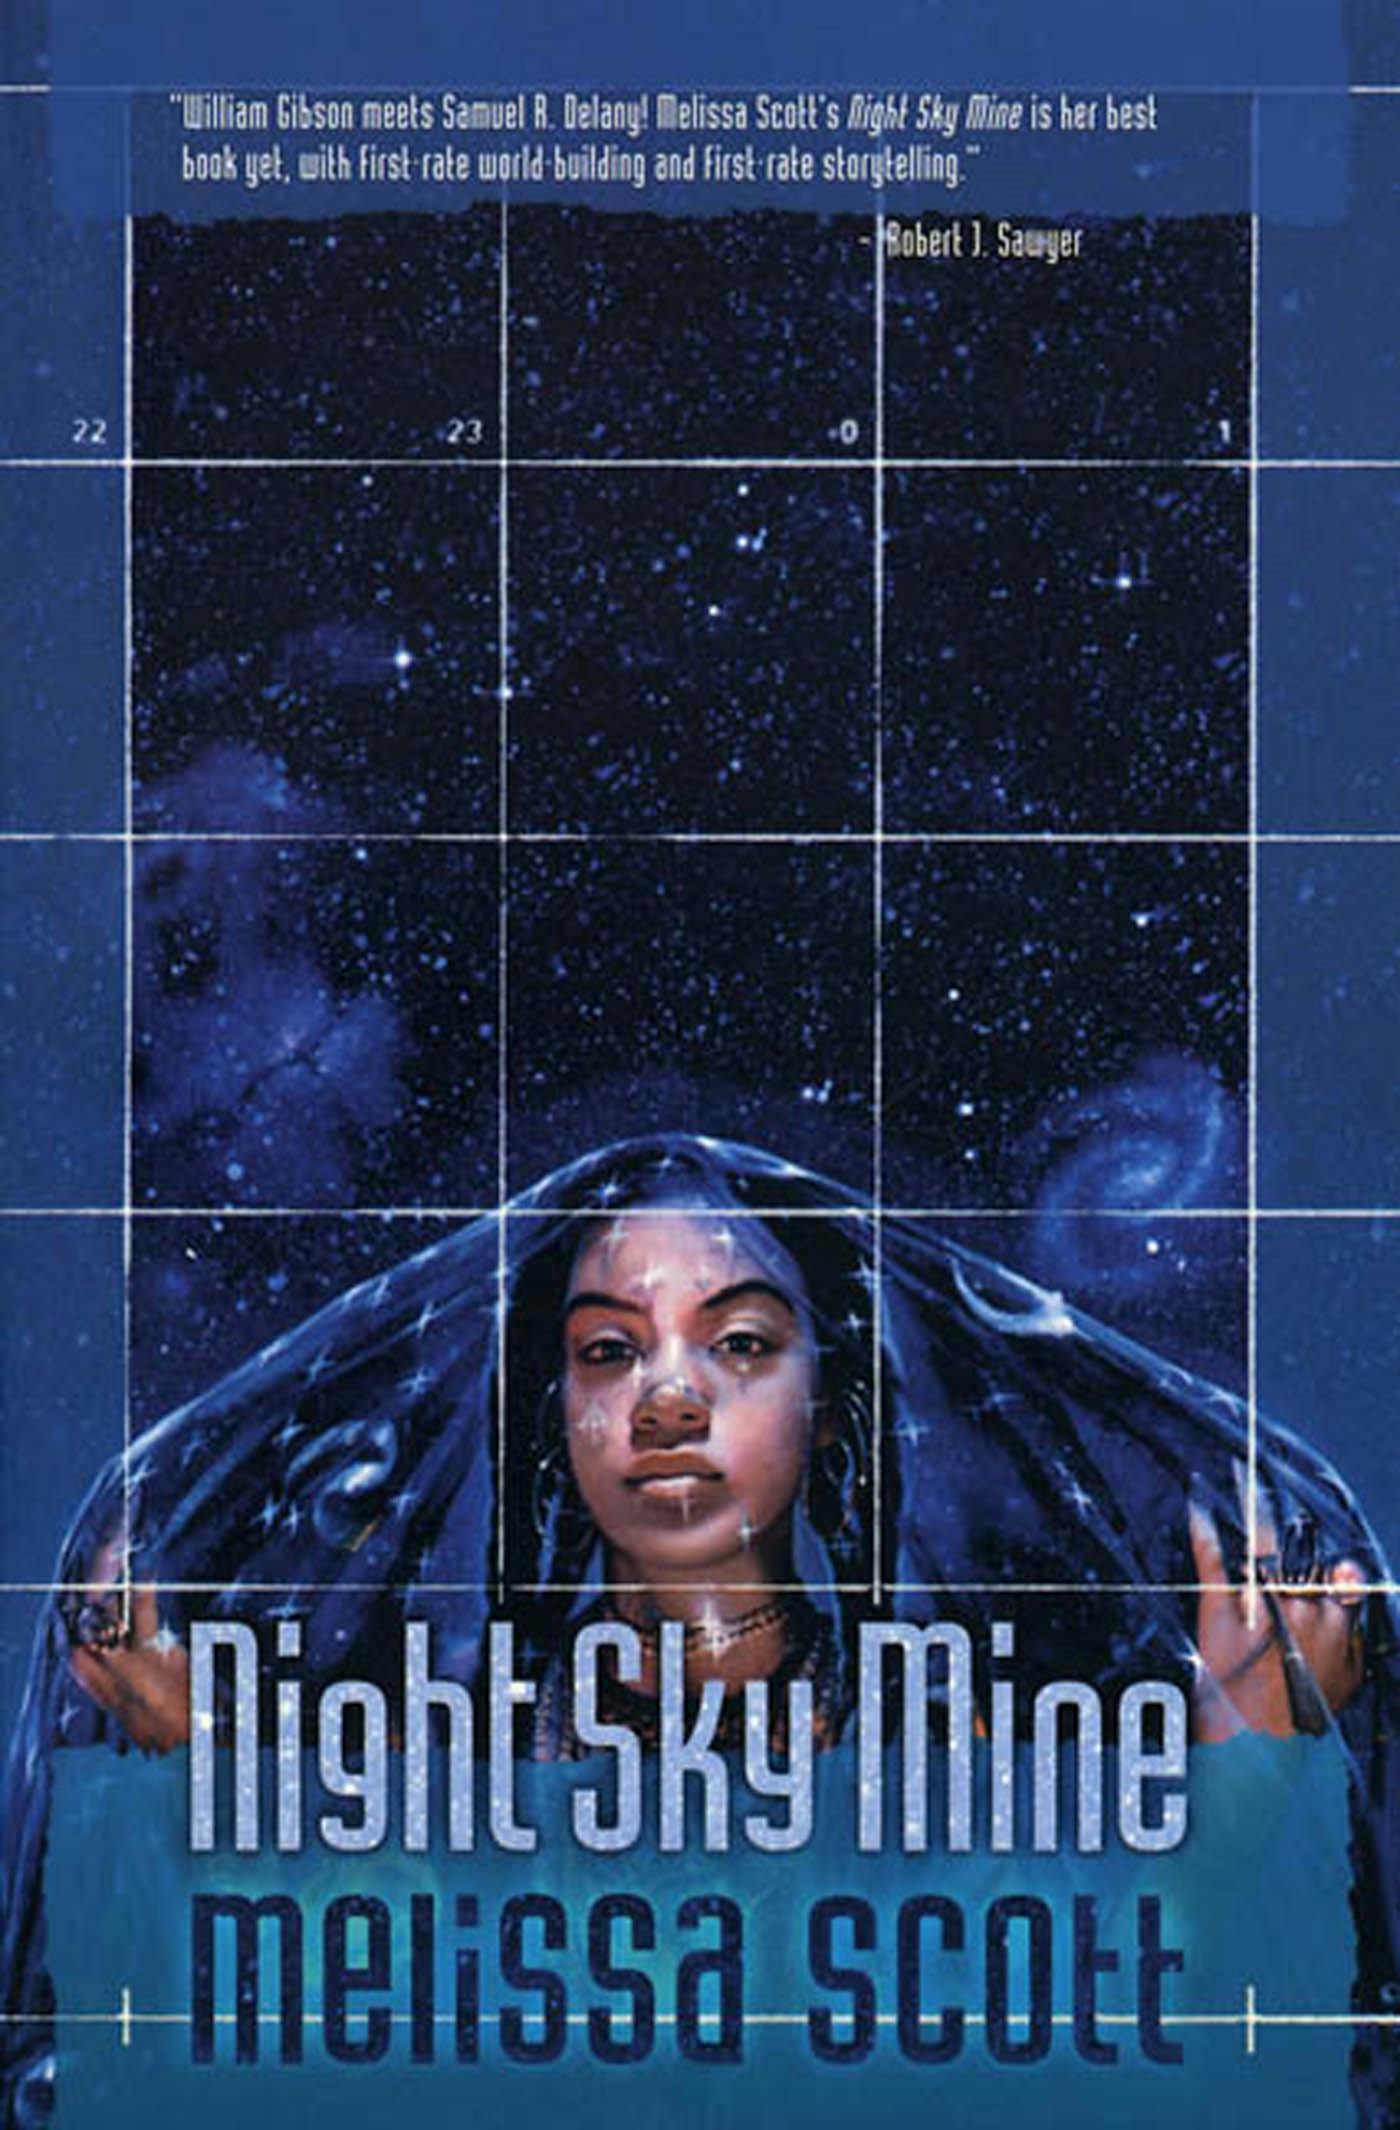 Cover for the book titled as: Night Sky Mine